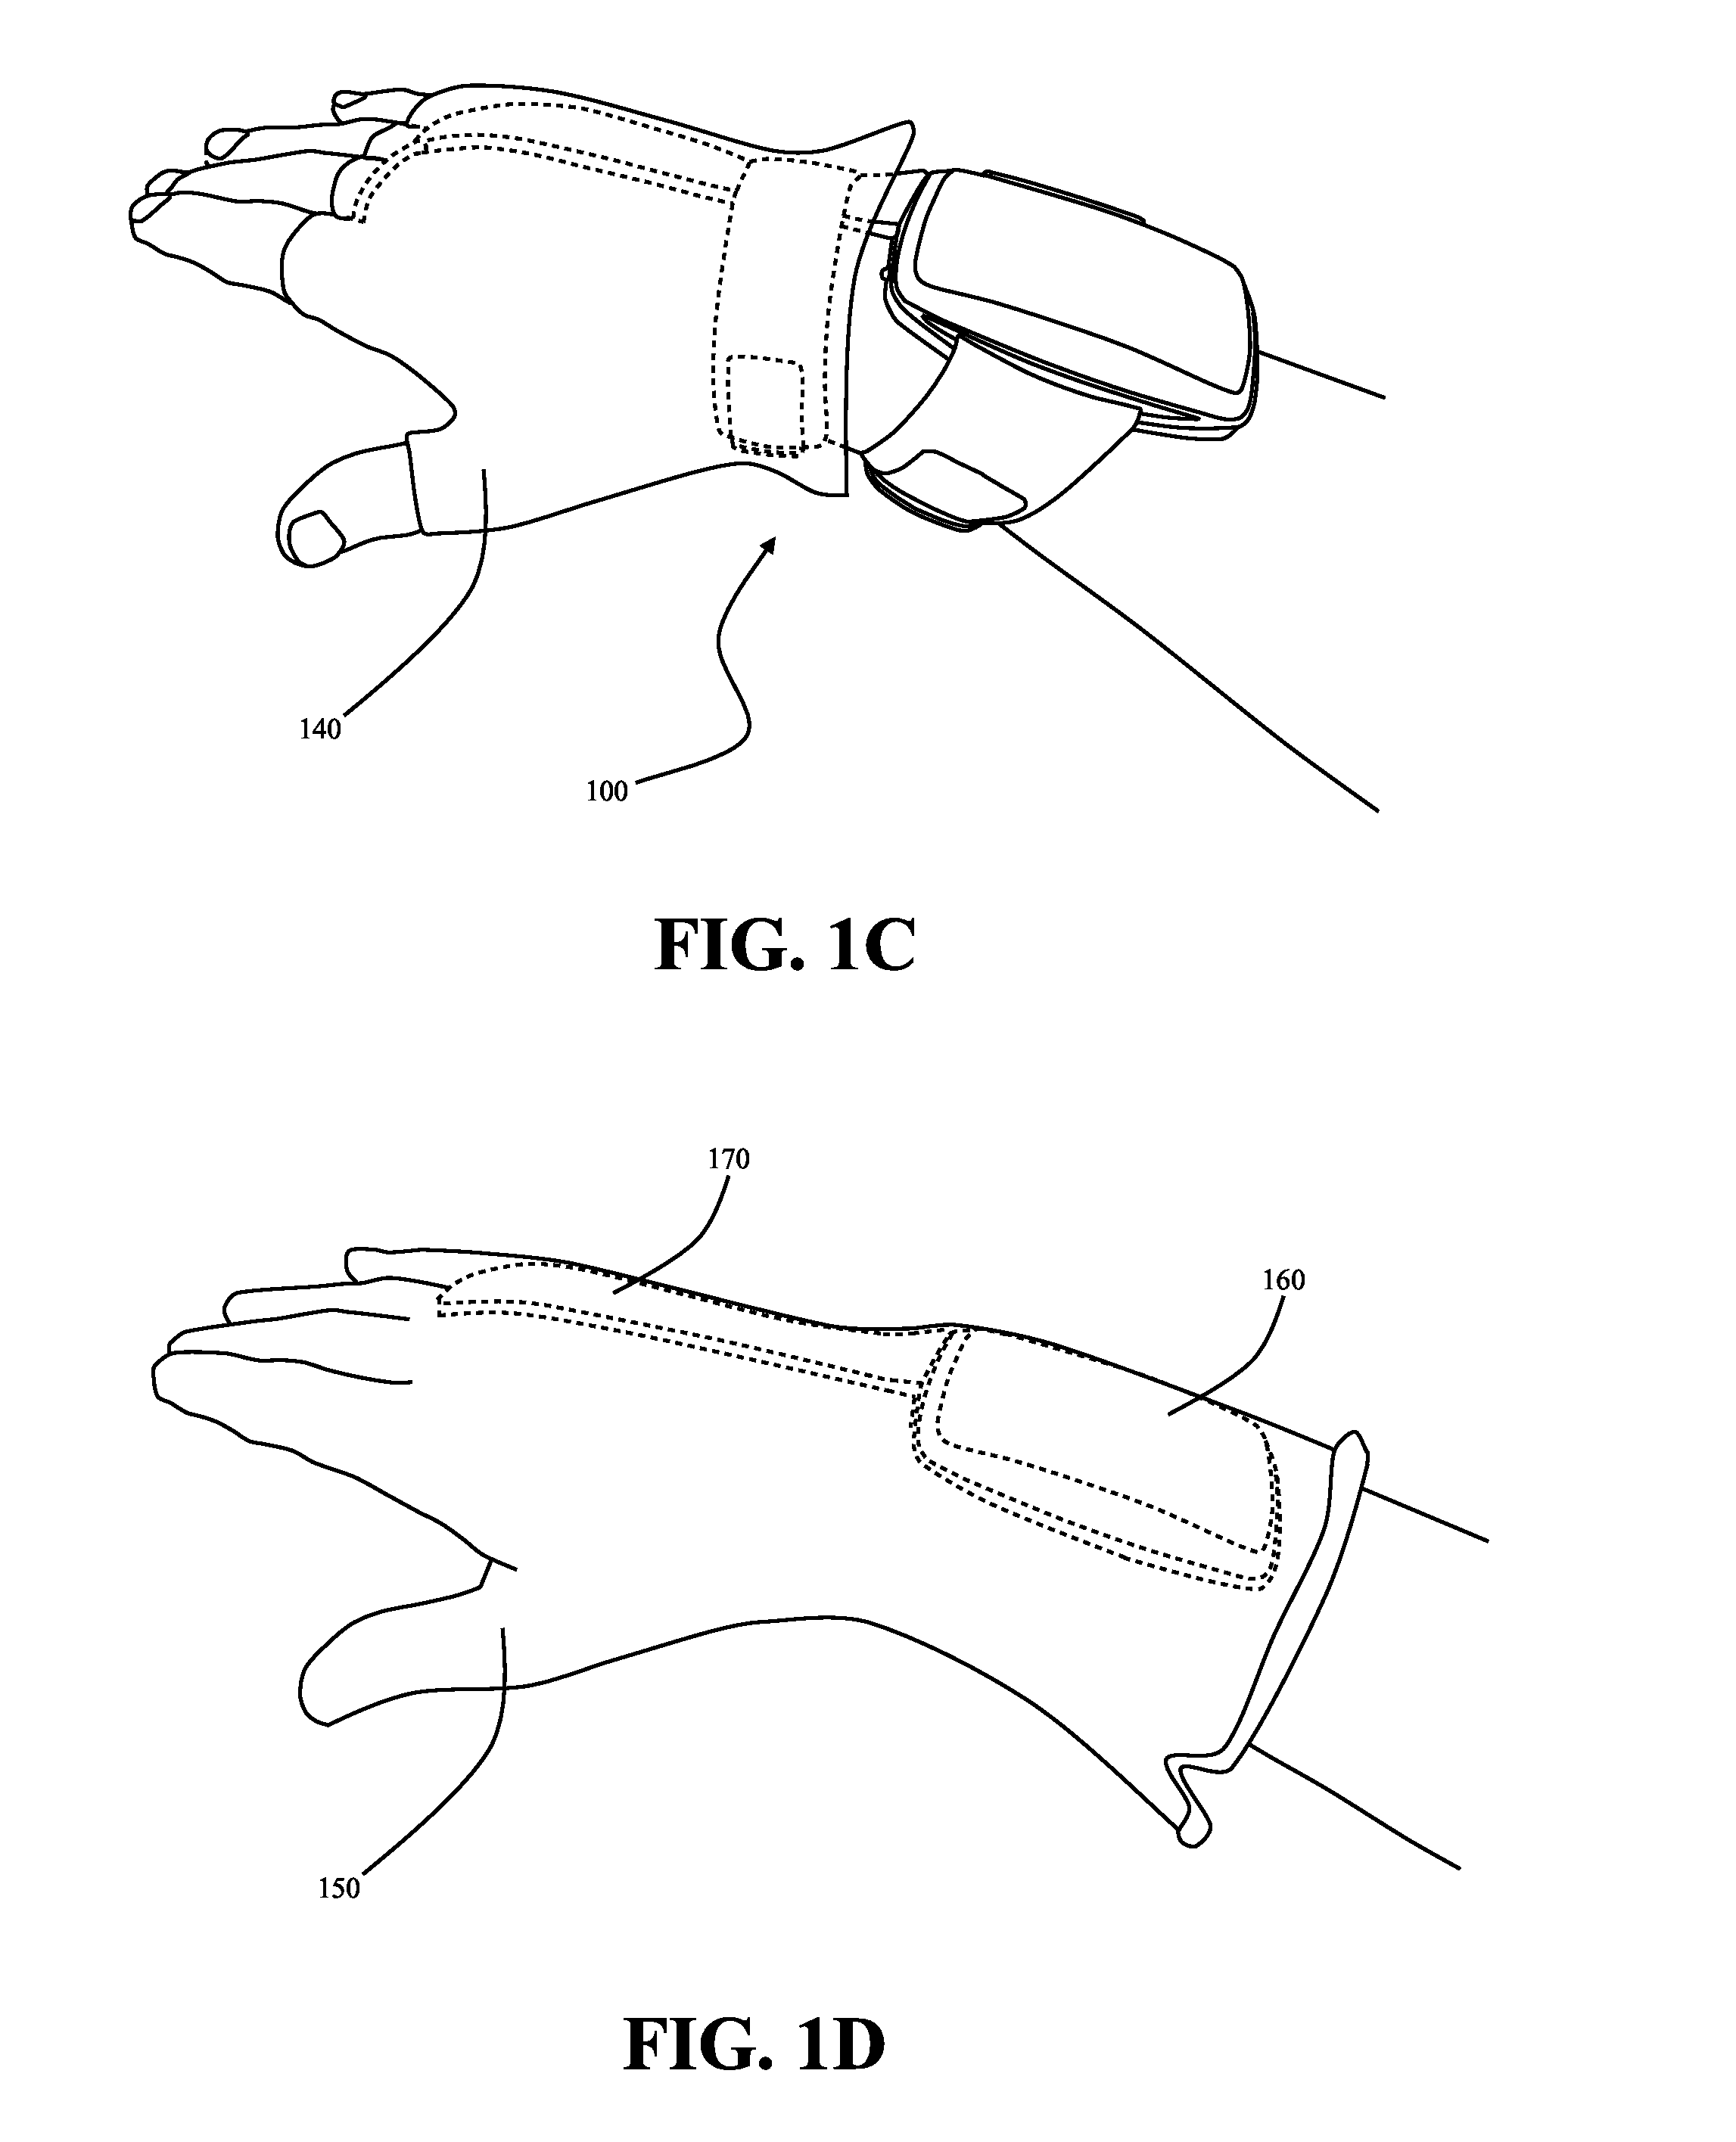 Joint movement detection device and system for coordinating motor output with manual wheelchair propulsion